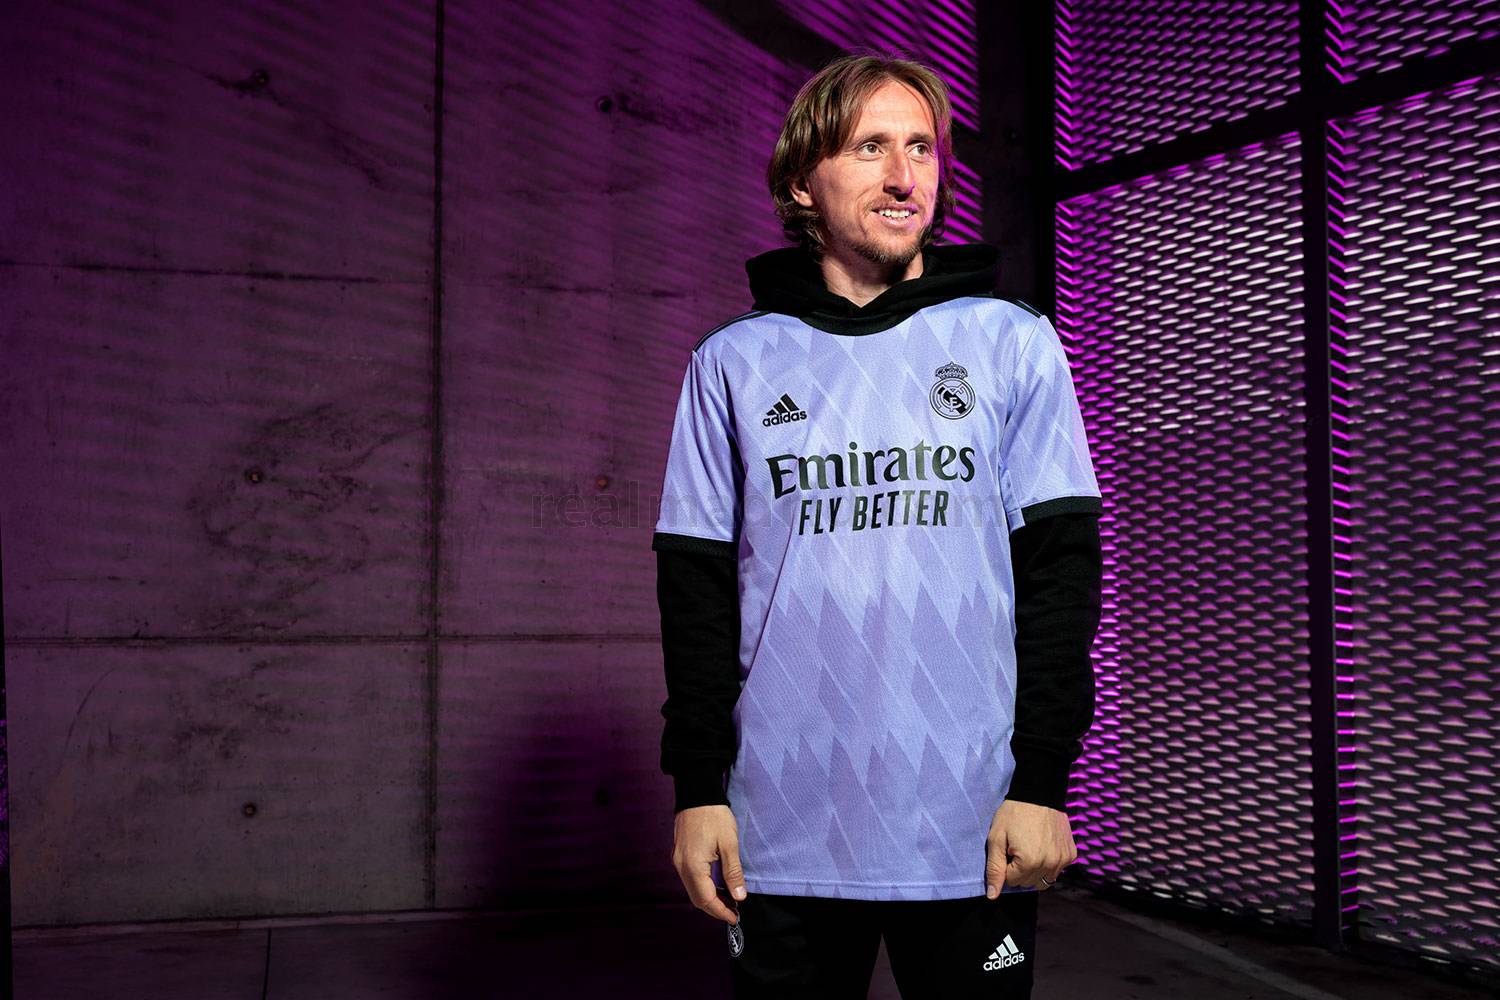 Adidas 22/23 Real Madrid Home Jersey S